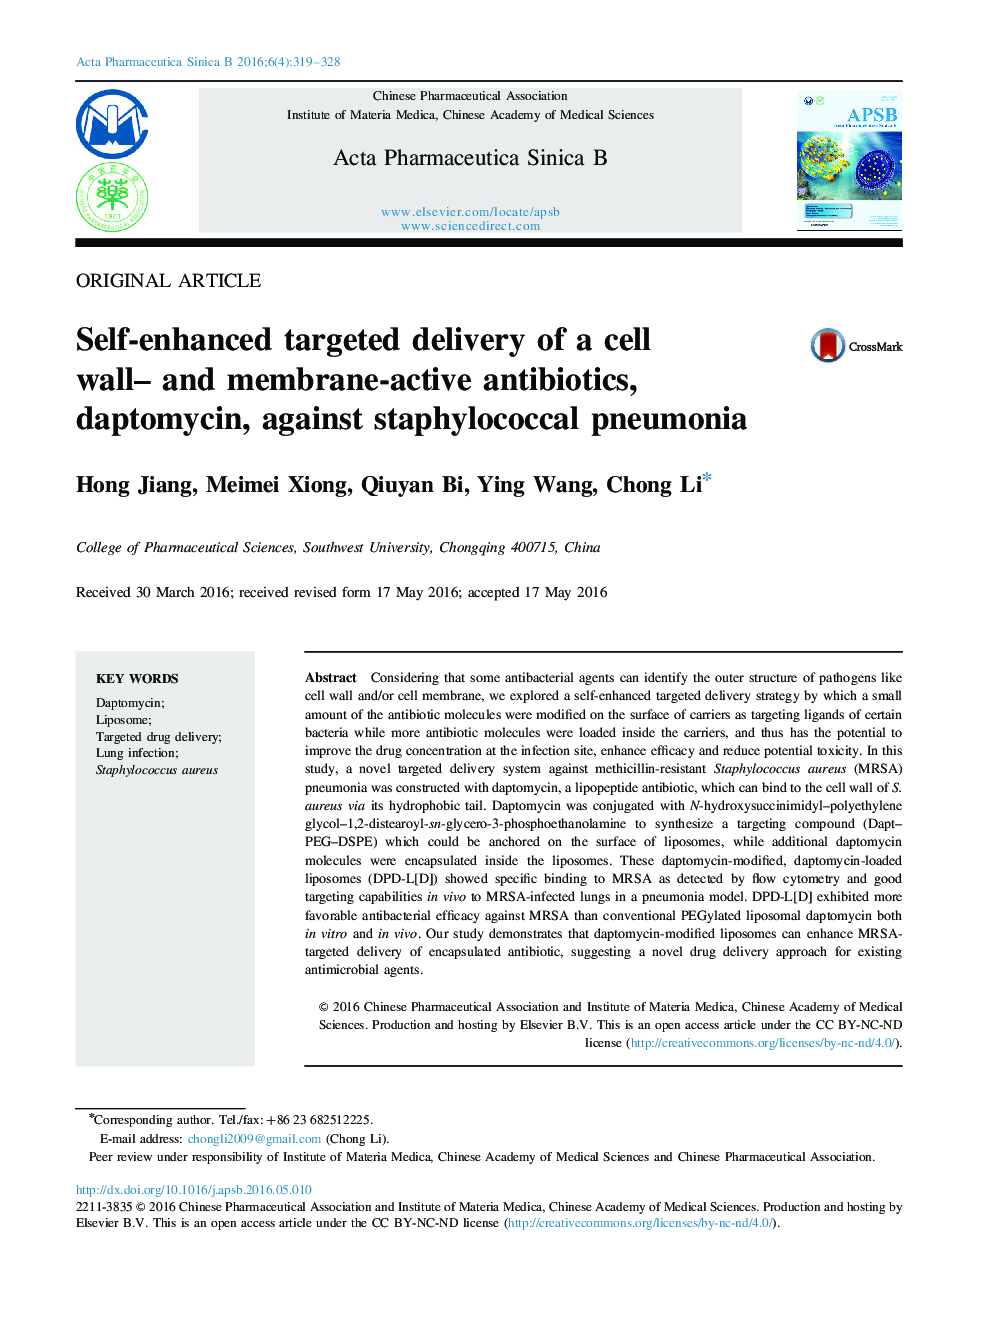 Self-enhanced targeted delivery of a cell wall– and membrane-active antibiotics, daptomycin, against staphylococcal pneumonia 